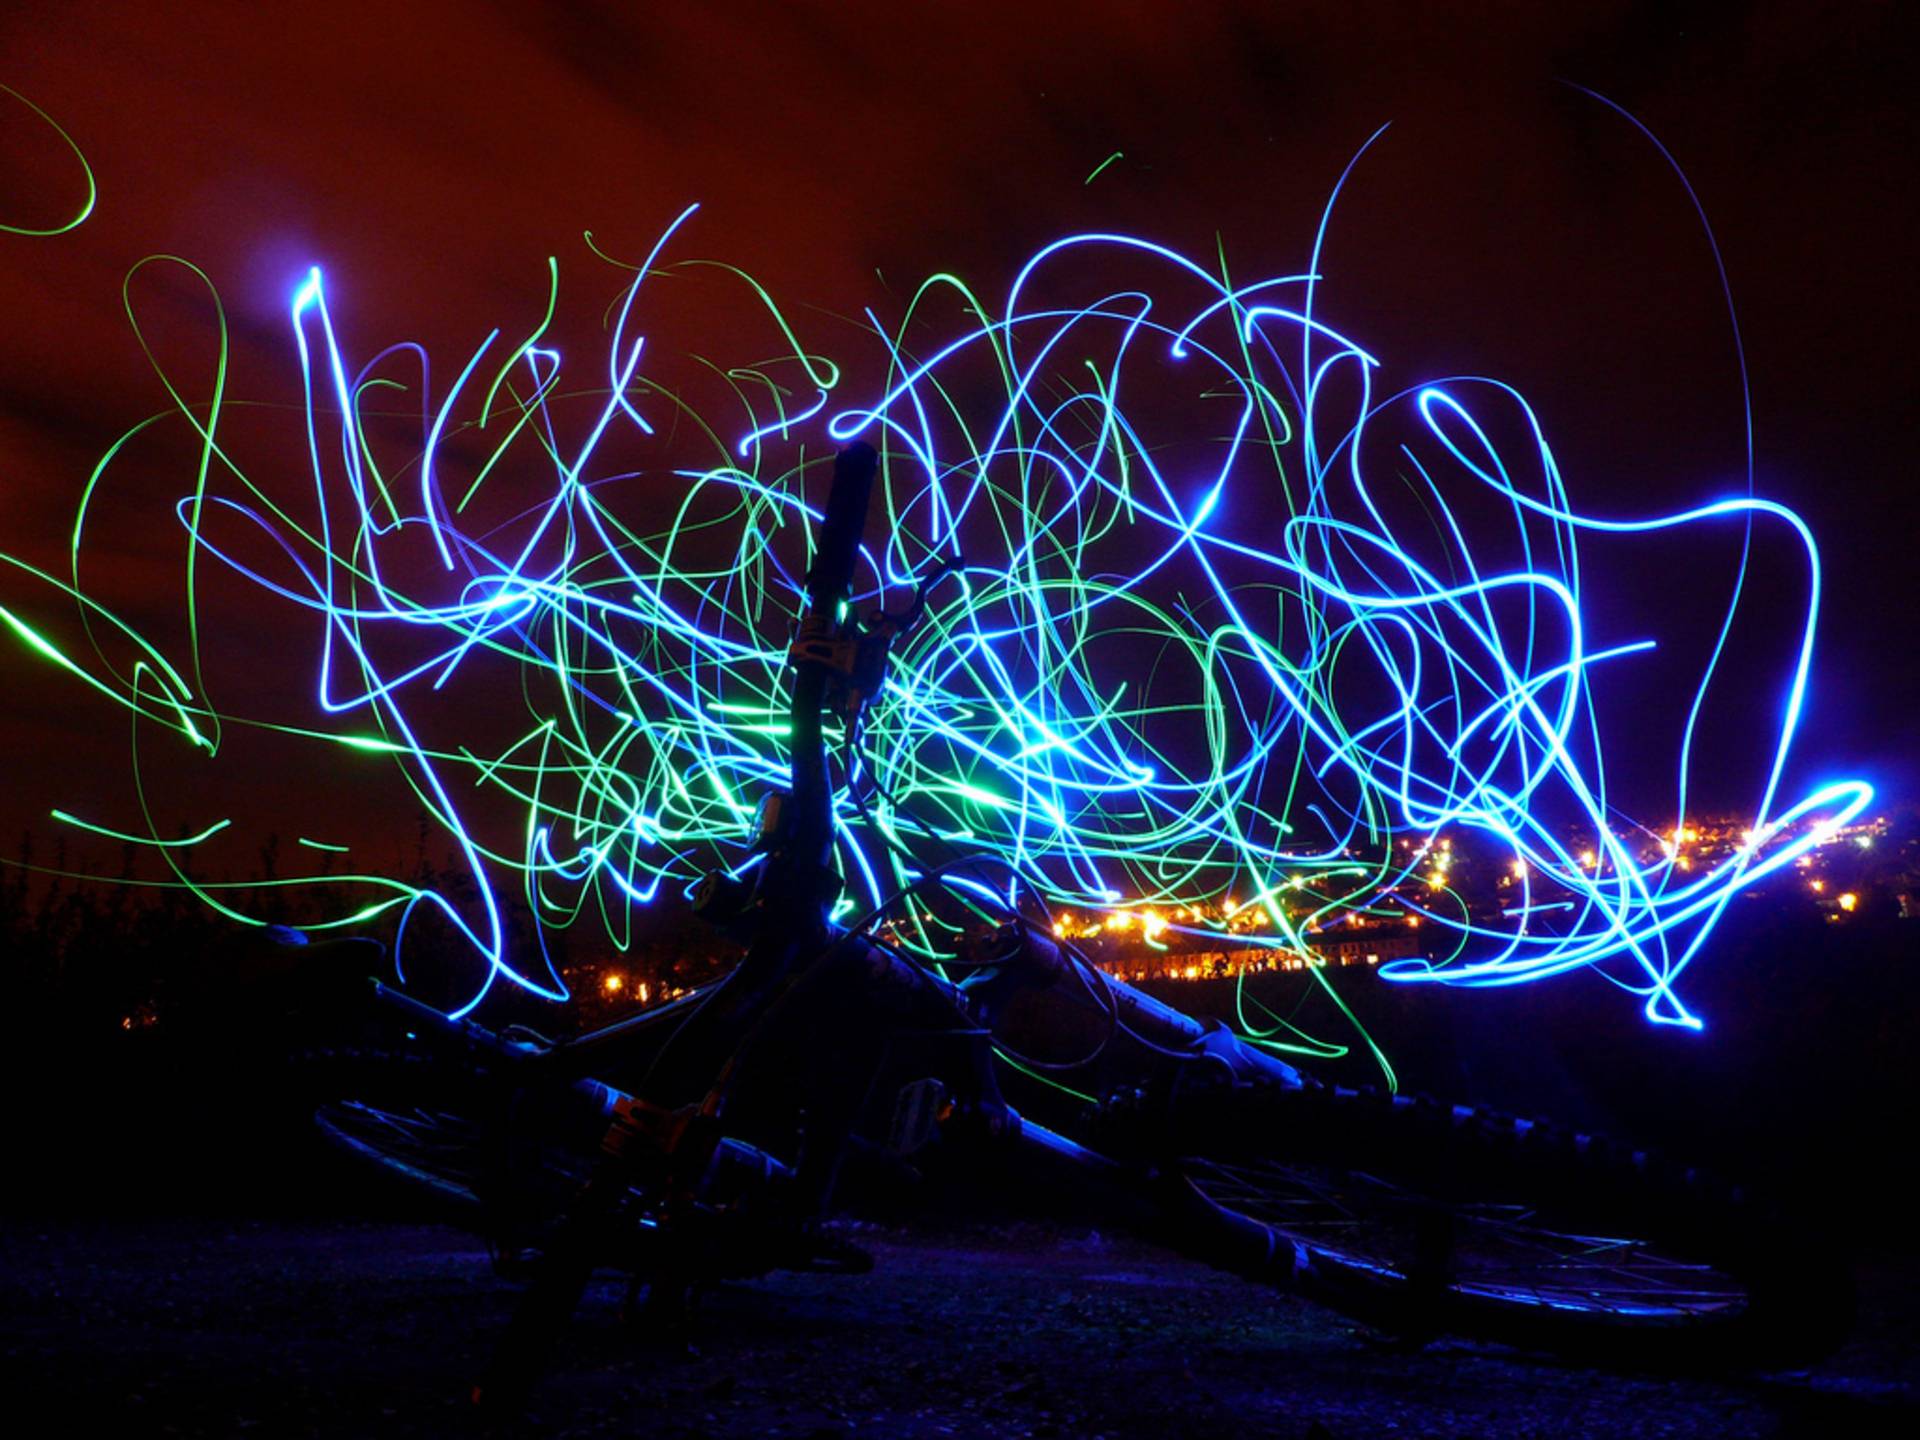 Lights Crazy Bicycle Abstract Wallpaper 1920x1440. Hot HD Wallpaper